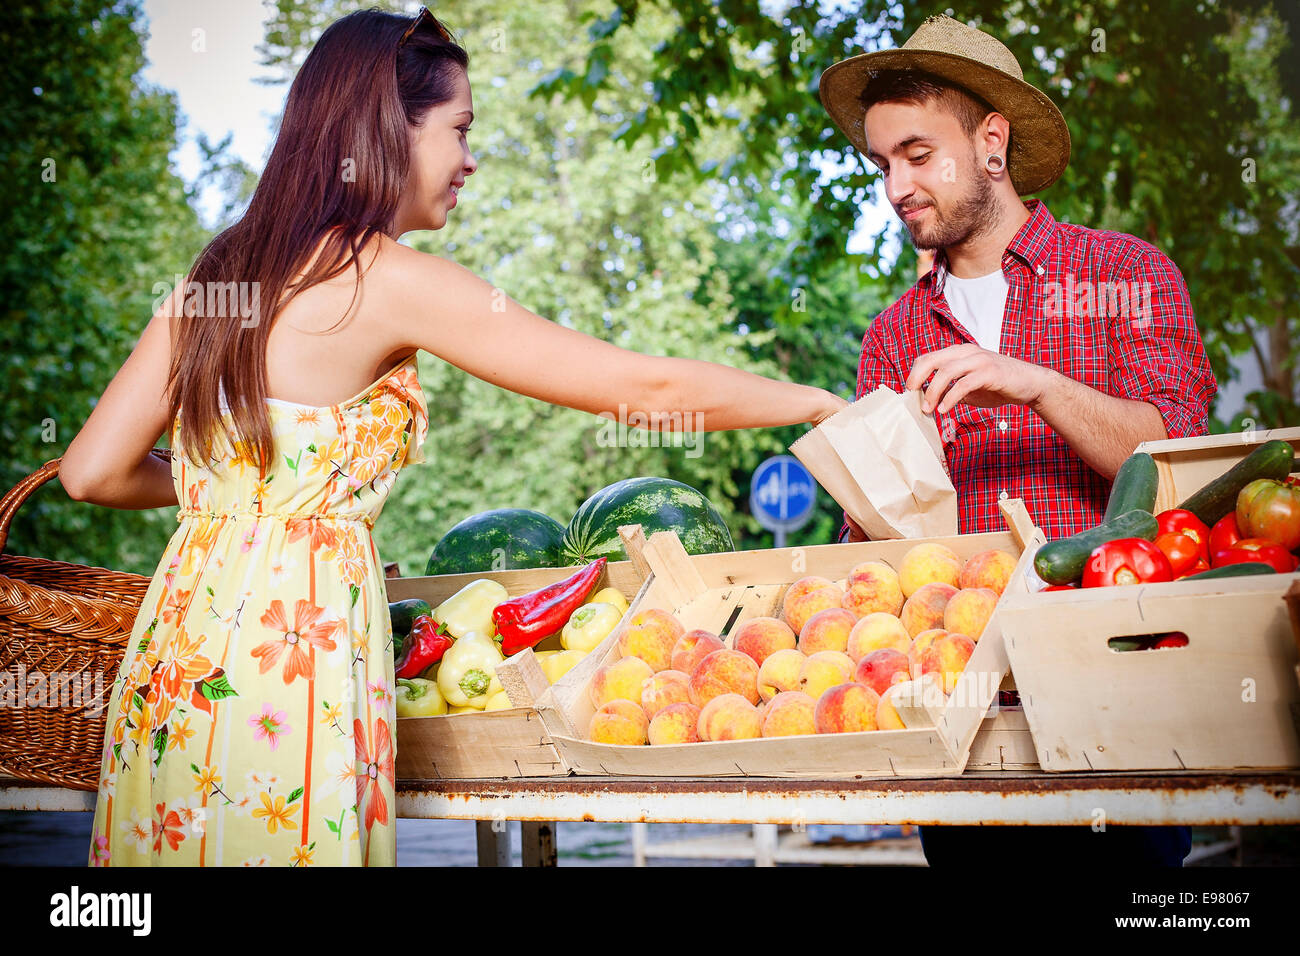 Woman buying fruit at market stall Stock Photo